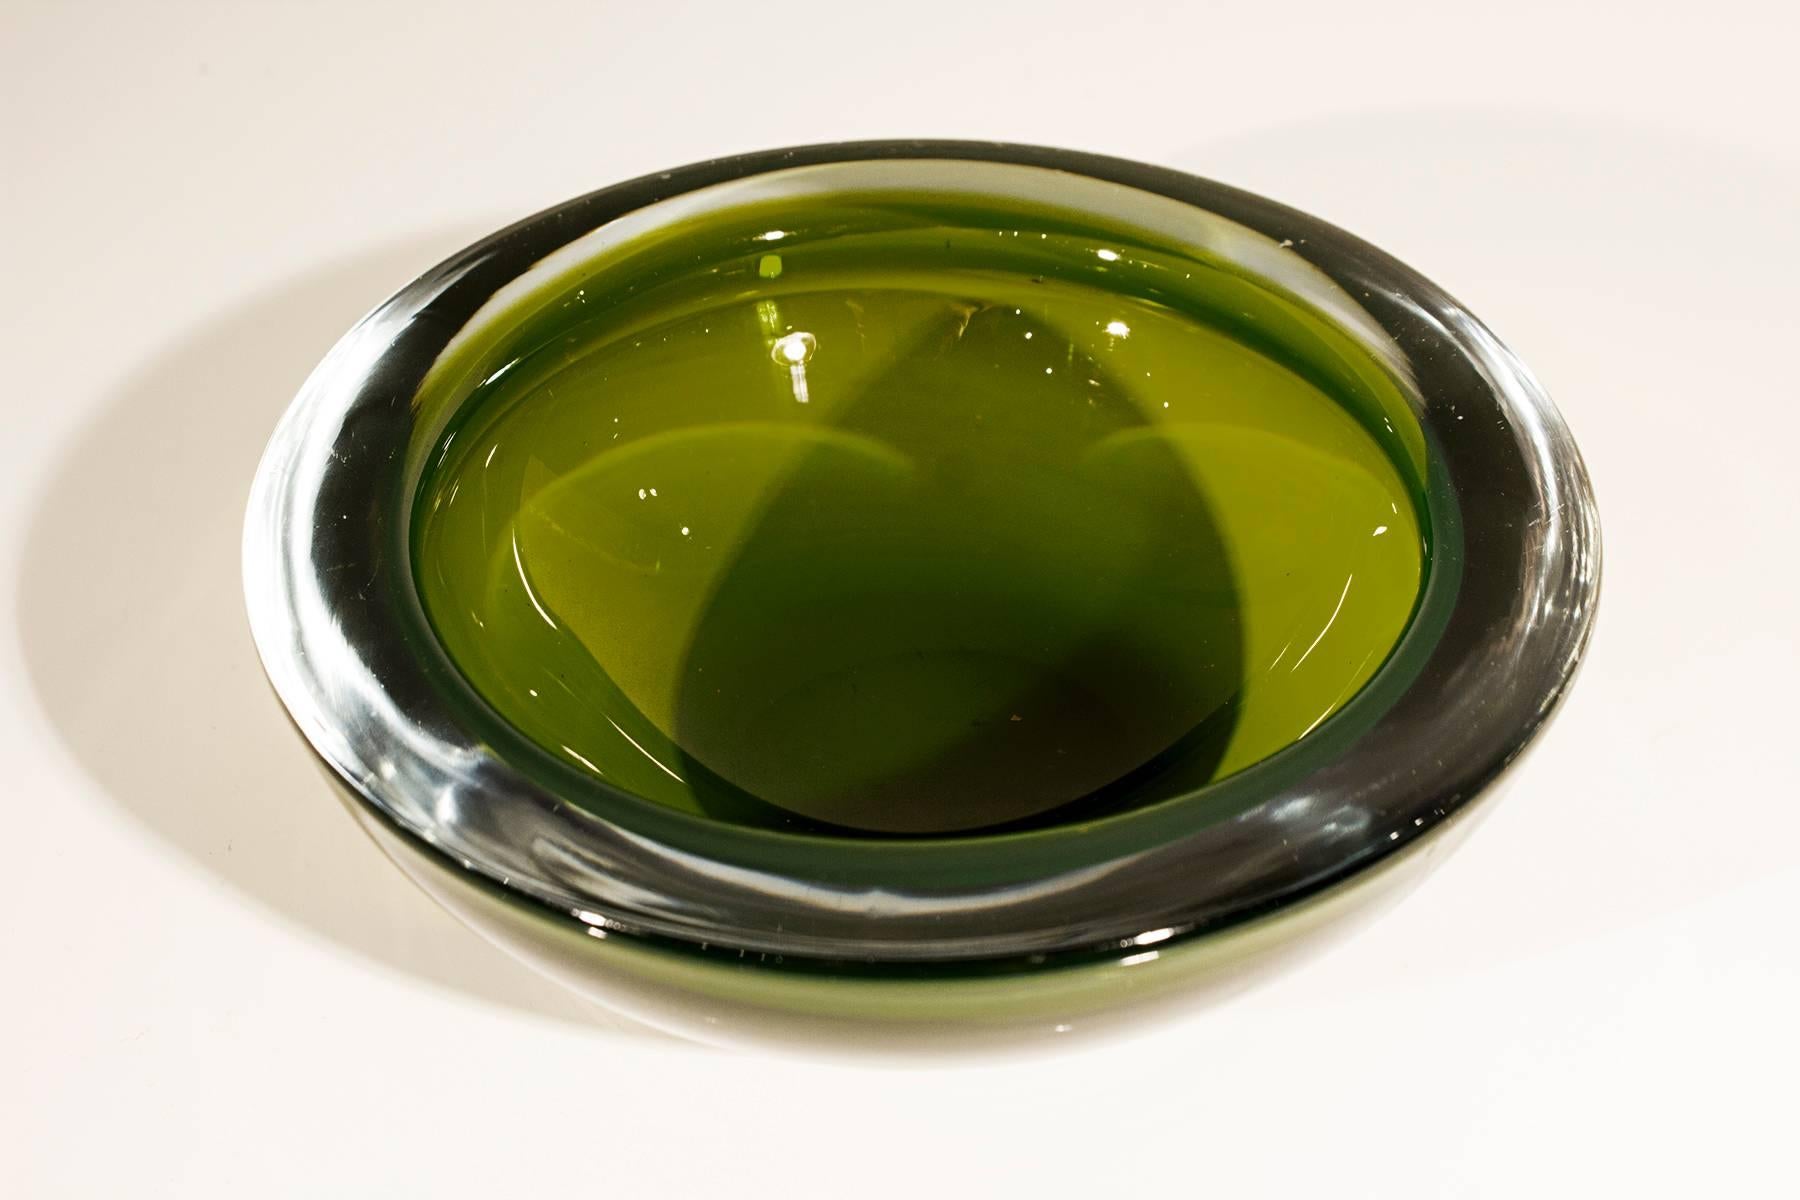 Large, lime green Murano geode bowl by Seguso, circa 1960s. Thick glass with tiny scratches on base (consistent with age).

Measures: 6.5